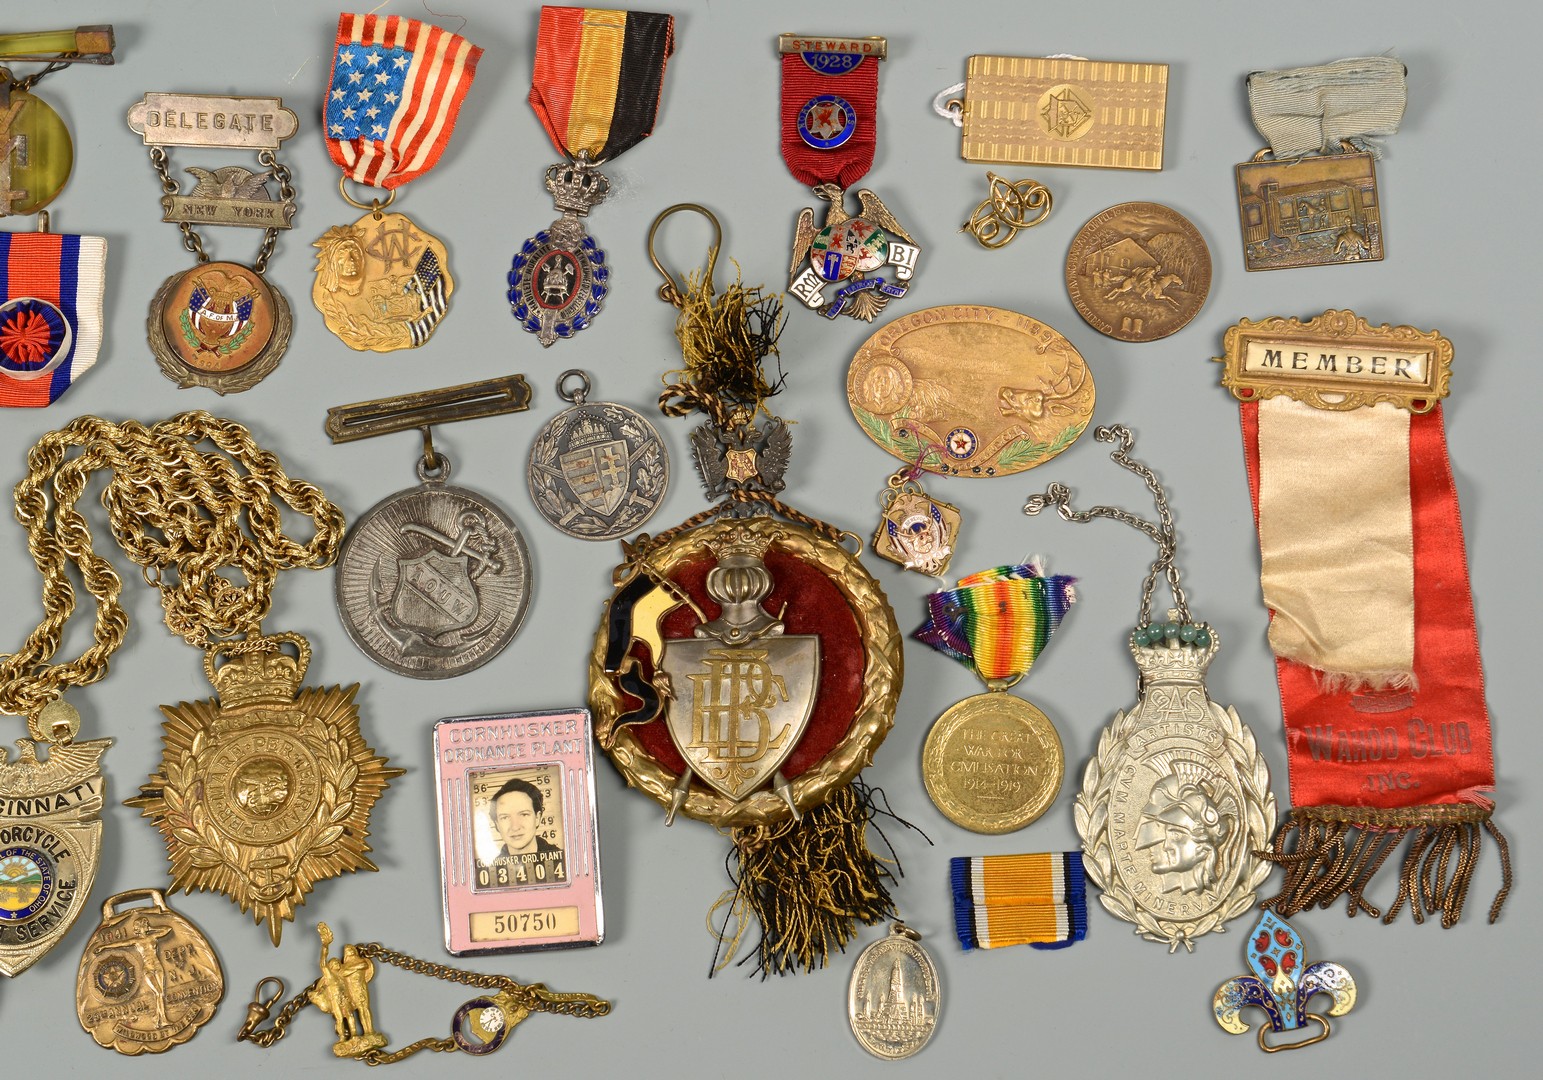 Lot 602: Collection Medals, Badges & related items, 46 items